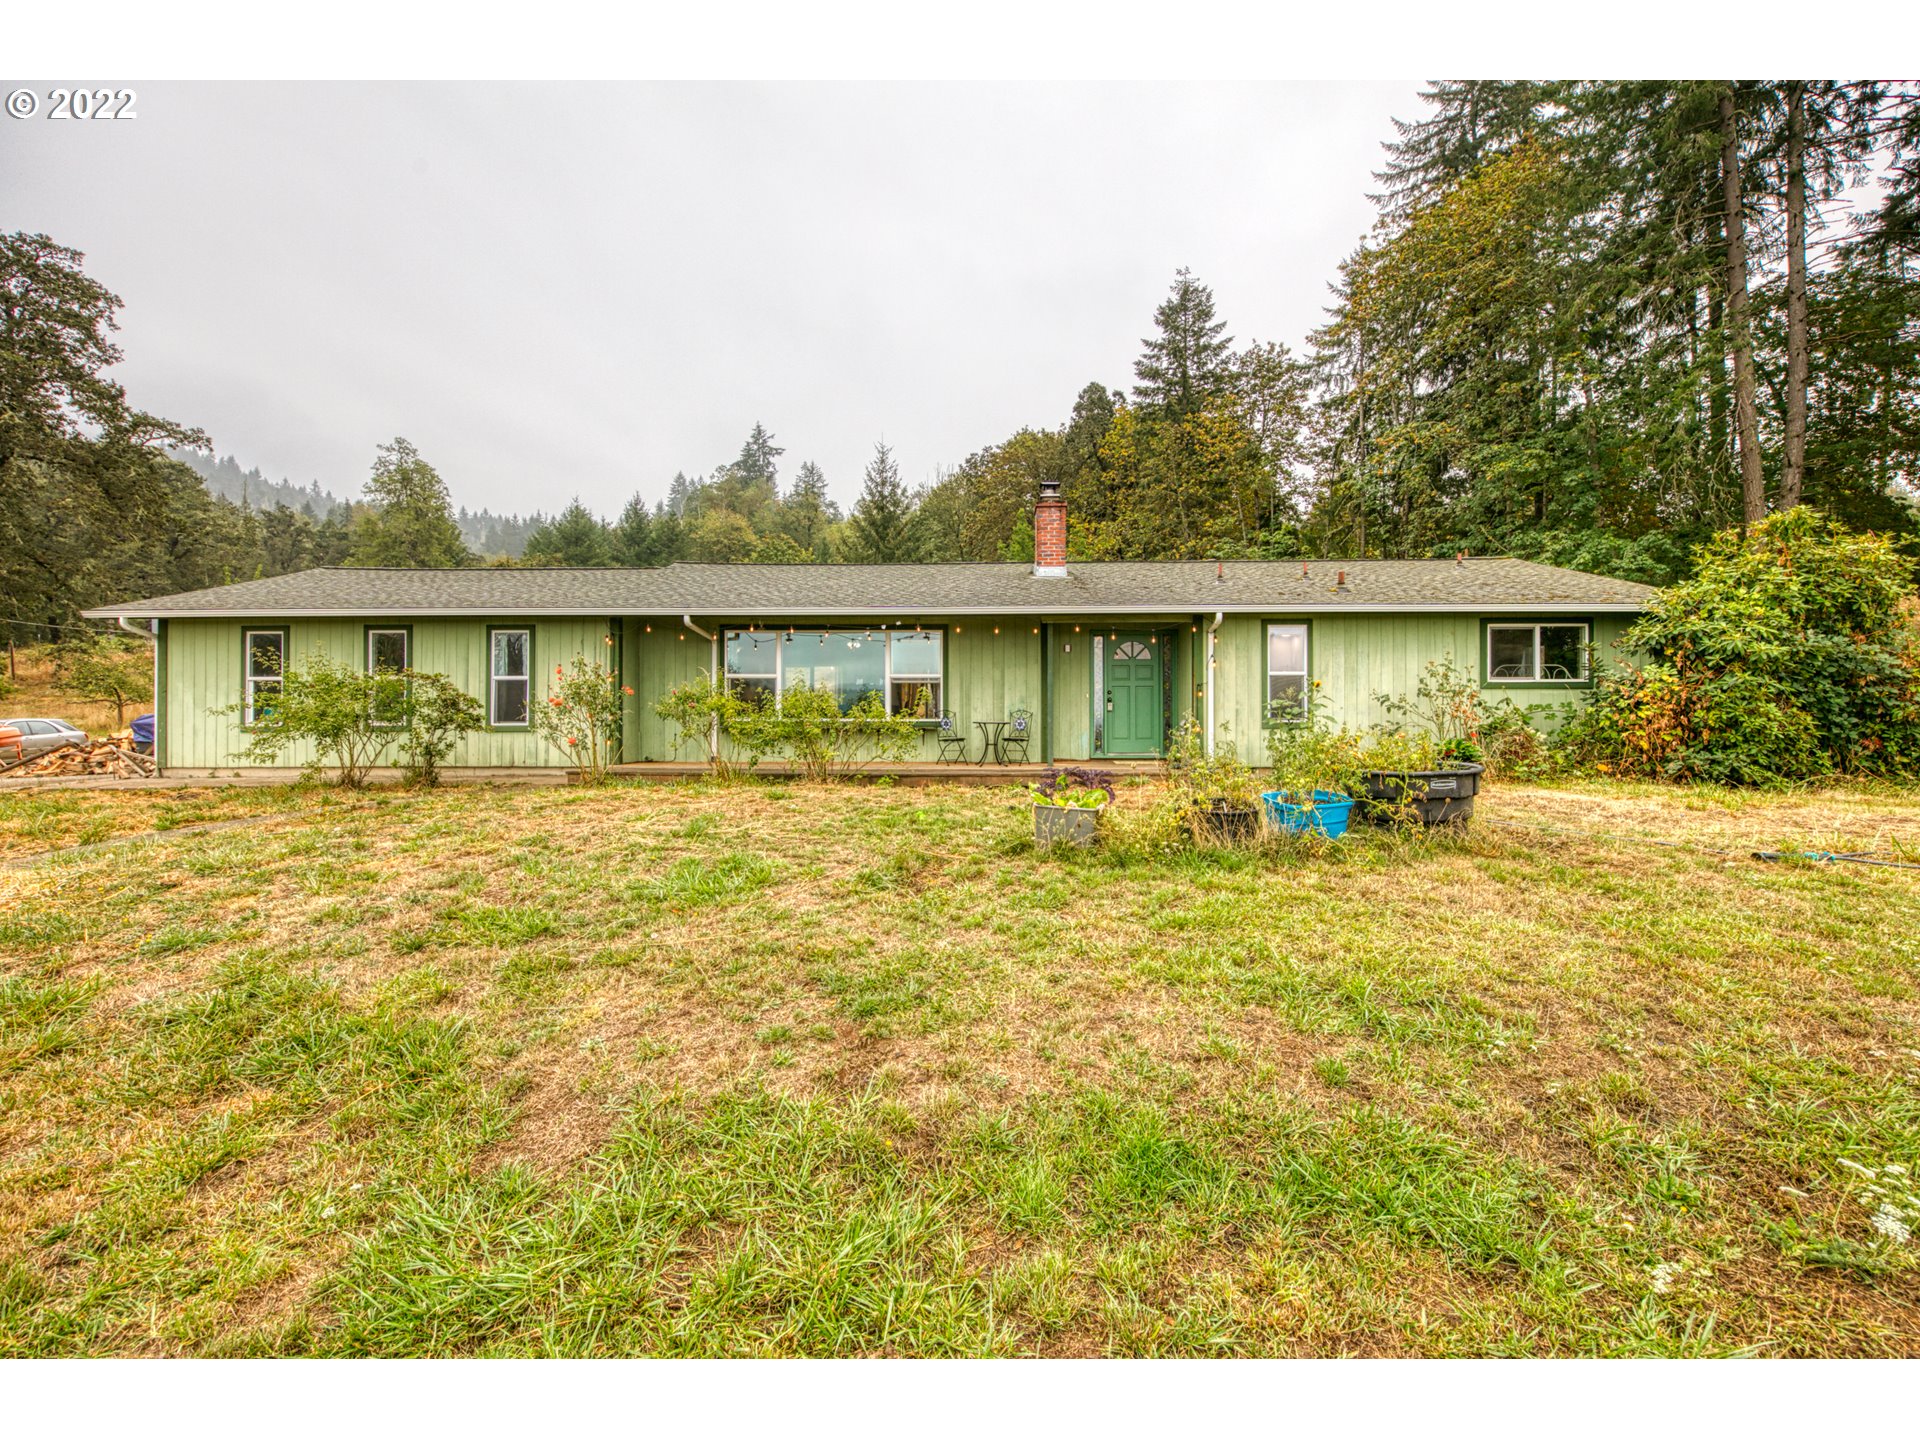 80433 SEARS RD, Cottage Grove, OR 97424